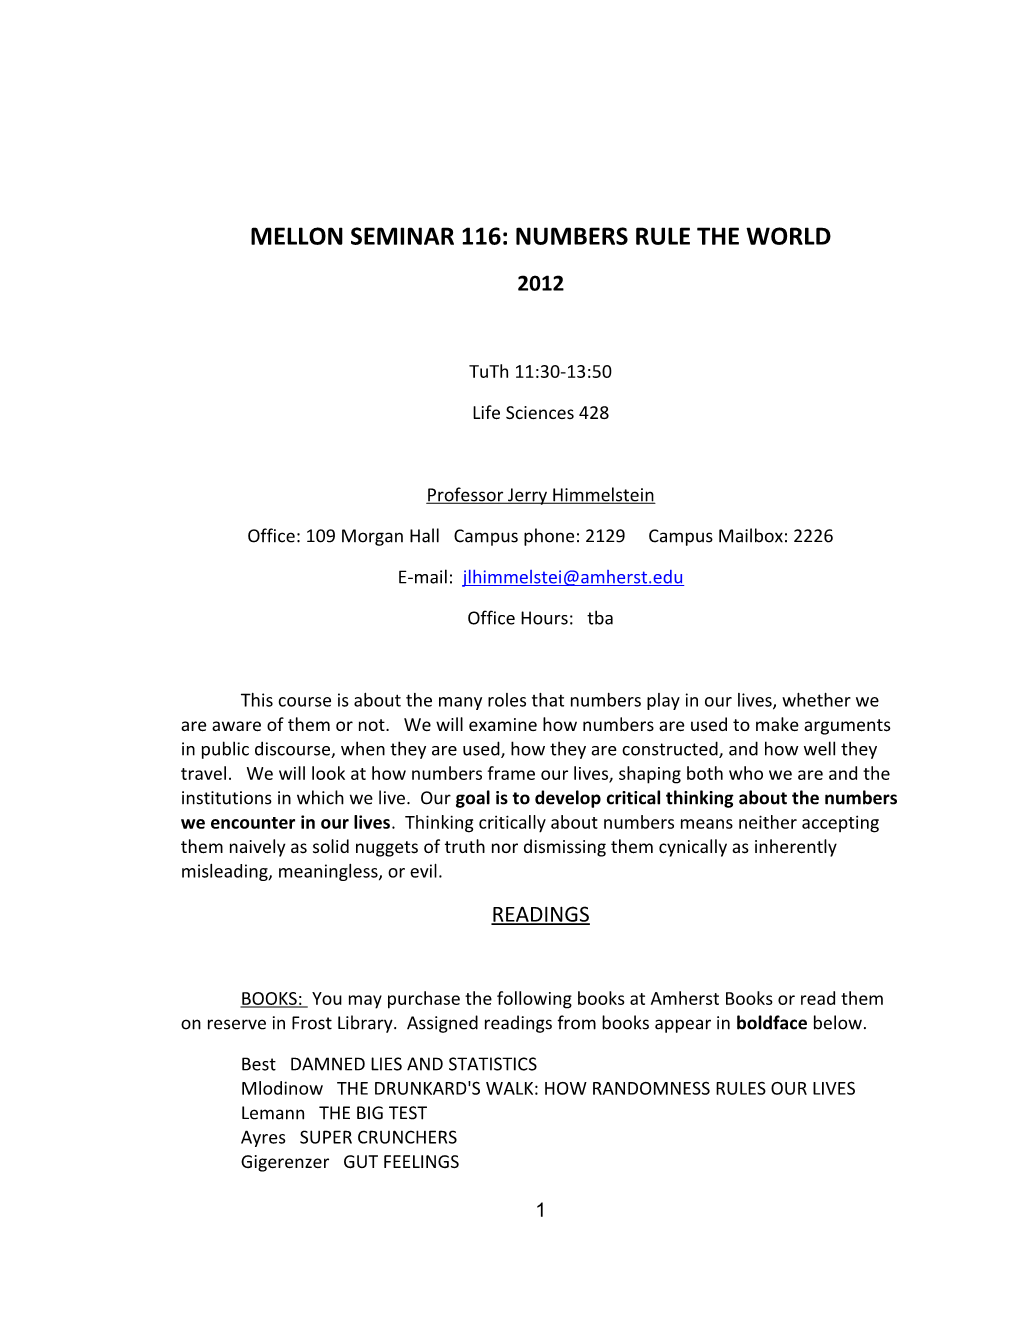 Mellon Seminar116: Numbers Rule the World